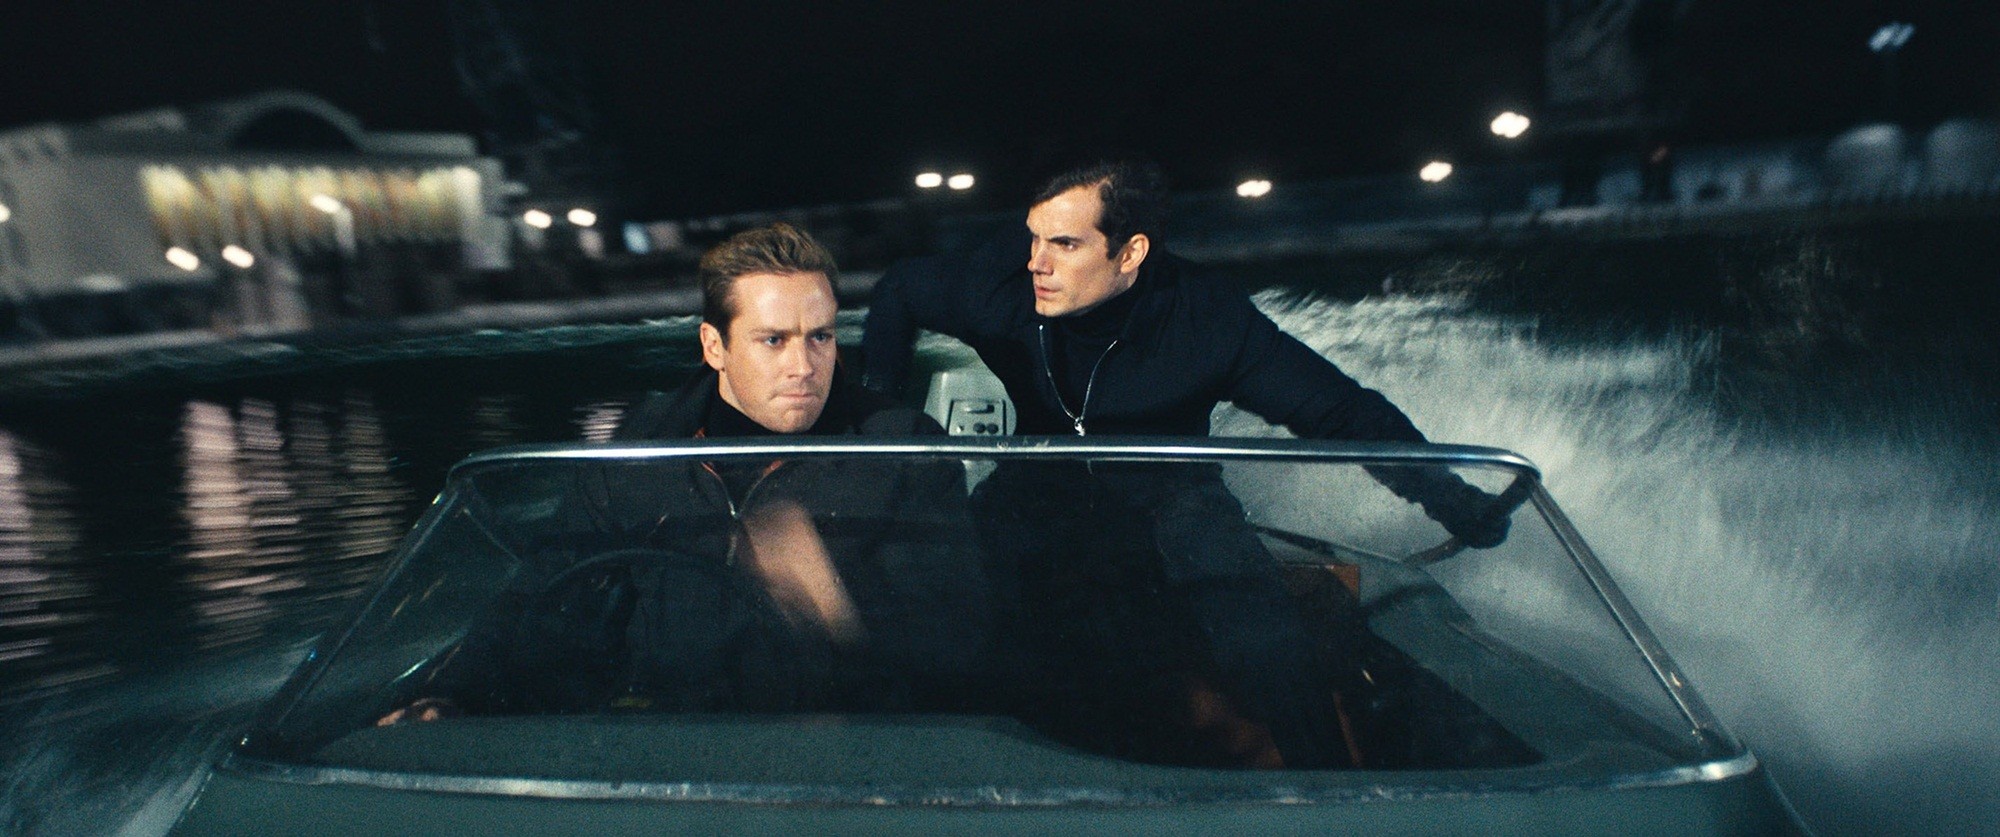 Armie Hammer stars as Illya Kuryakin and Henry Cavill stars as Napoleon Solo in Warner Bros. Pictures' The Man from U.N.C.L.E. (2015)